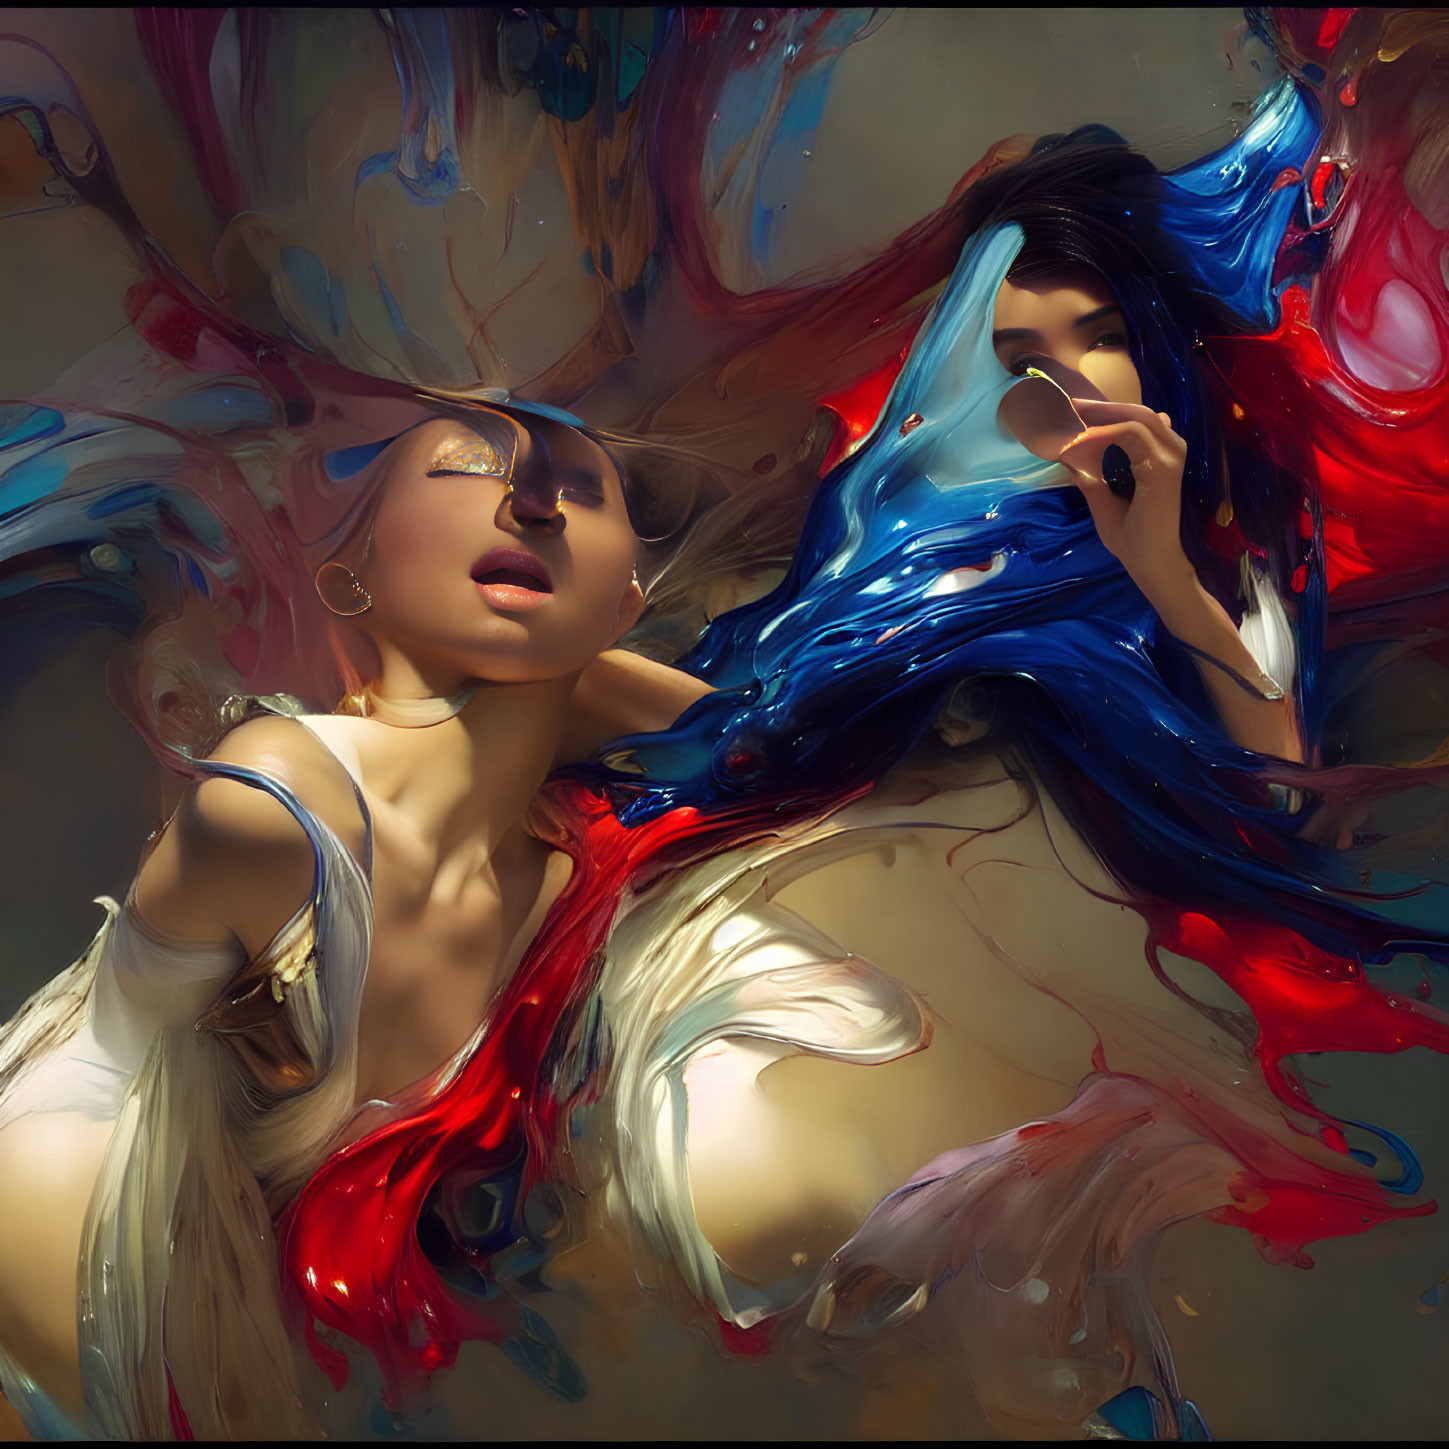 Abstract painting of two women in red and blue swirls on warm background